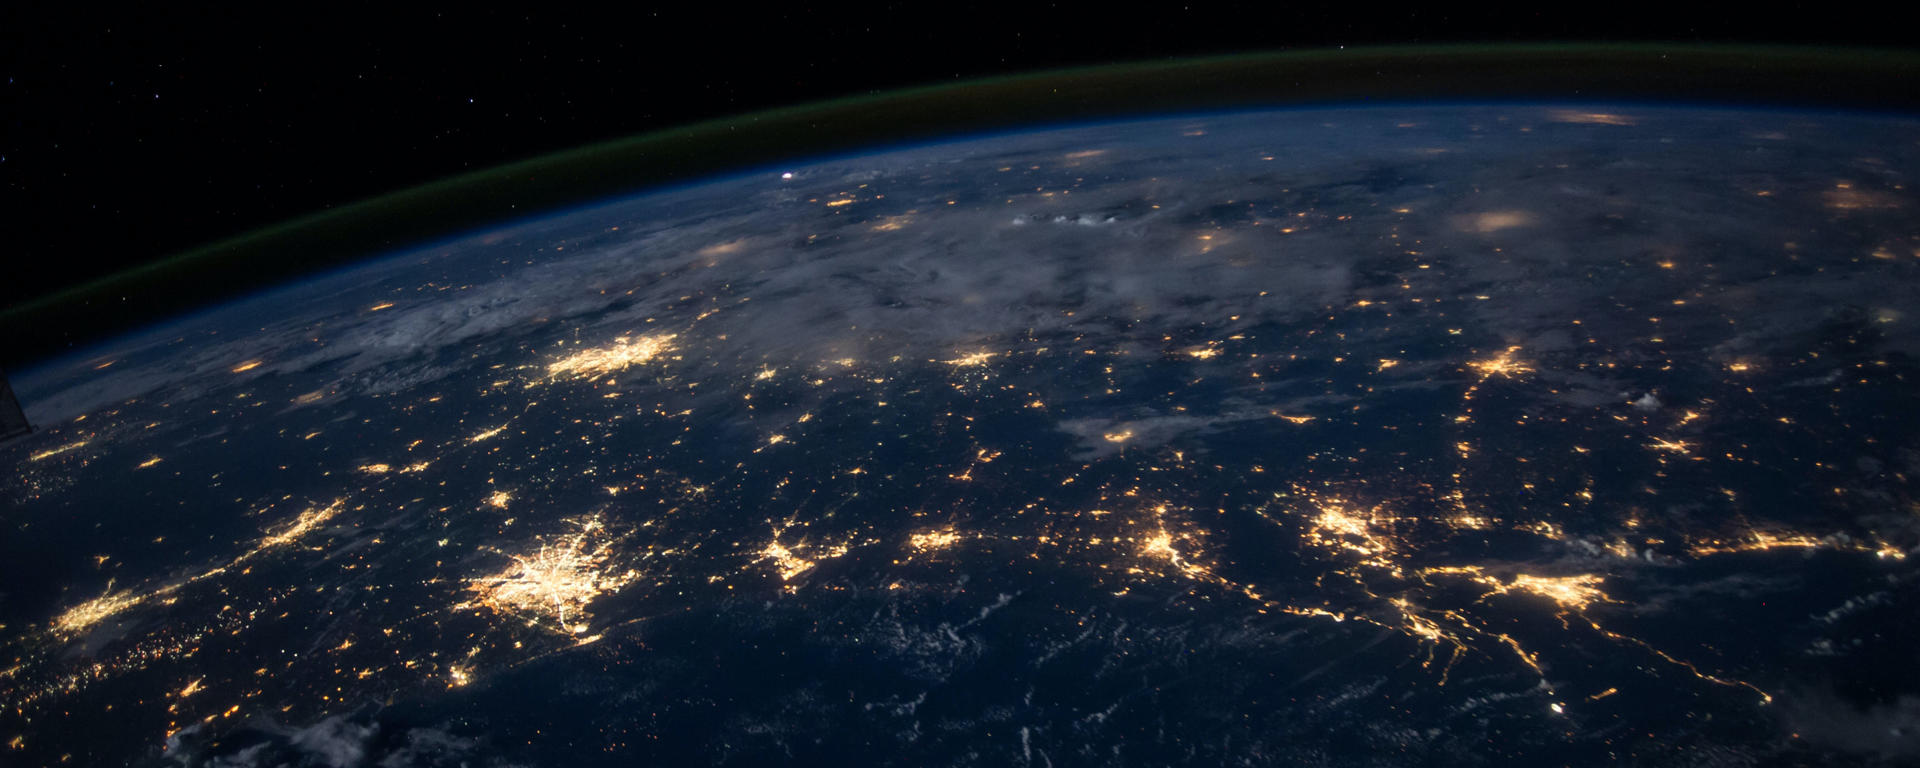 city lights on earth's surface at night